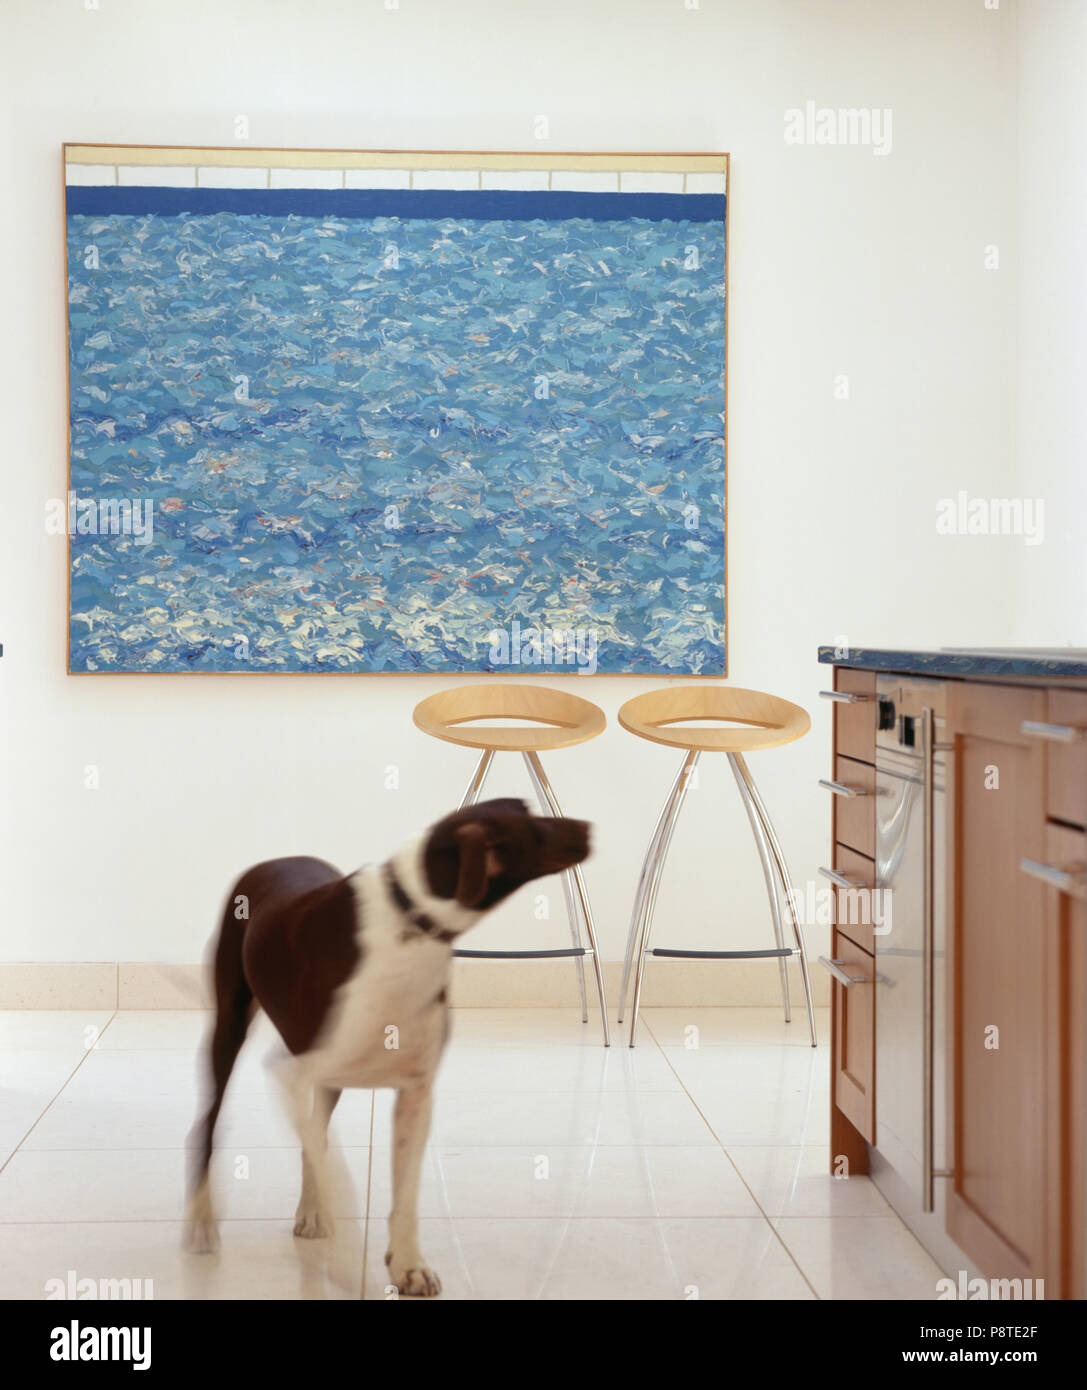 Dog standing in modern ktichen with large picture Stock Photo